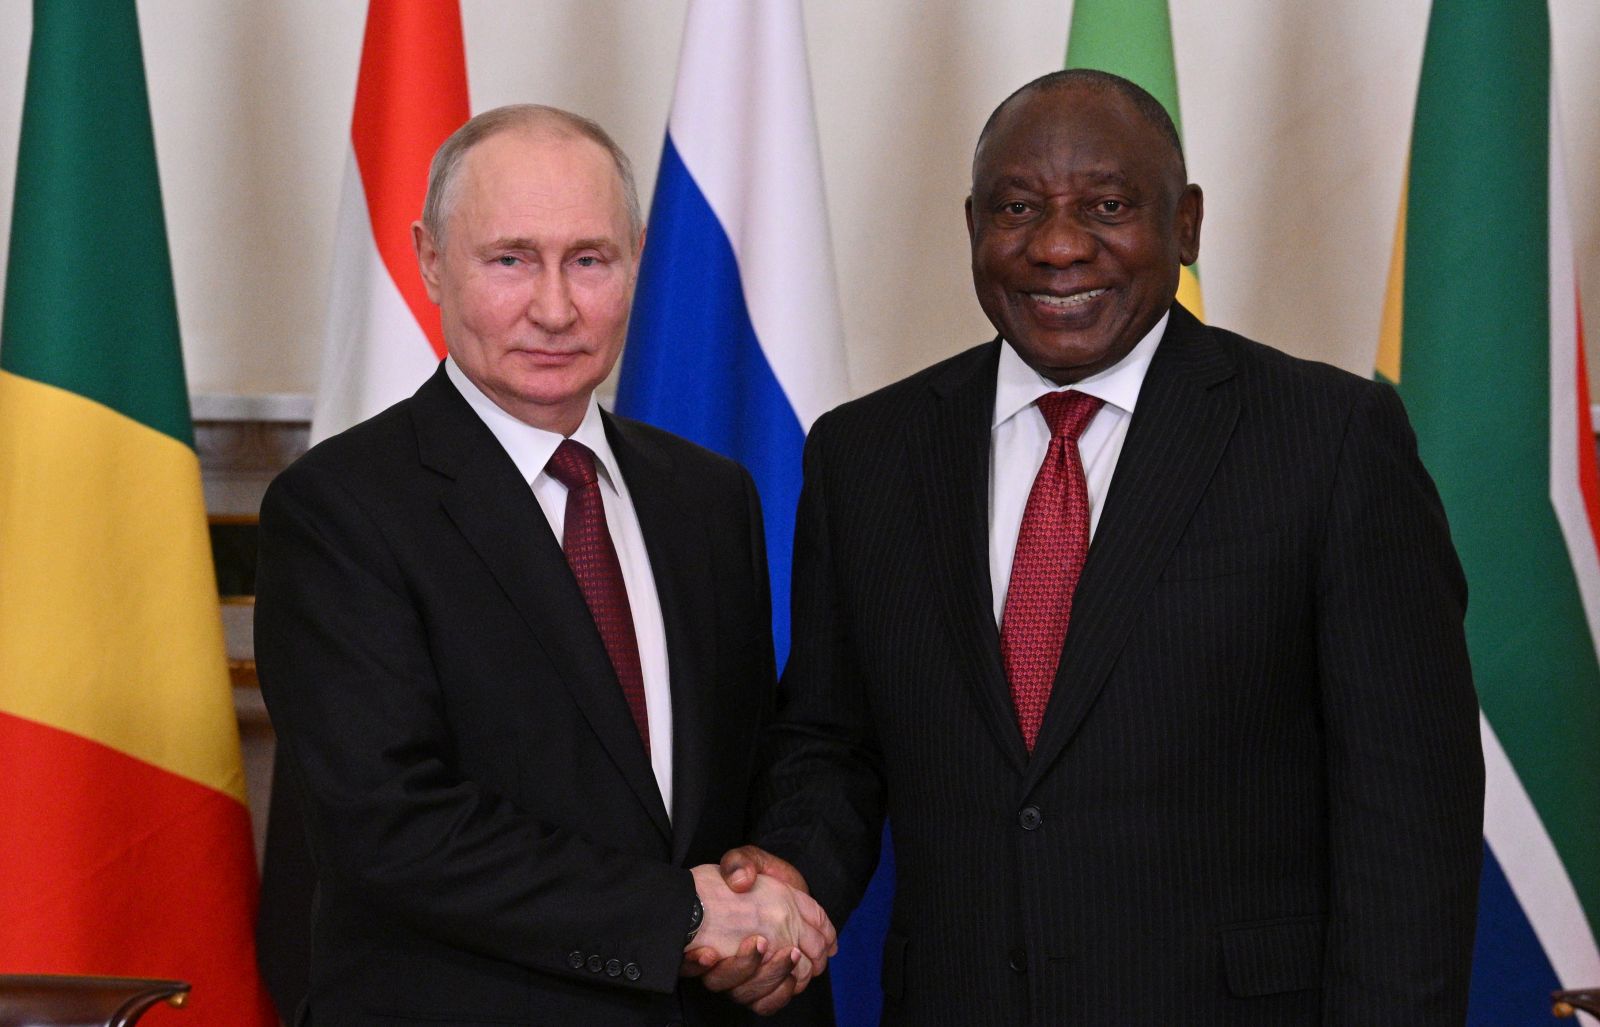 epa10698069 A handout picture made available by Photo host Agency RIA Novosti shows Russian President Vladimir Putin (L) shakes hands with South African President Cyril Ramaphosa (R) during their meeting on the sidelines of the St. Petersburg International Economic Forum in St. Petersburg, Russia, 18 June 2023. Vladimir Putin invited South African President Cyril Ramaphosa to discuss cooperation within the BRICS framework.  EPA/RAMIL SITDIKOV/HOST PHOTO AGENCY / RIA NOVOSTI / SPUTNIK HANDOUT  HANDOUT EDITORIAL USE ONLY/NO SALES